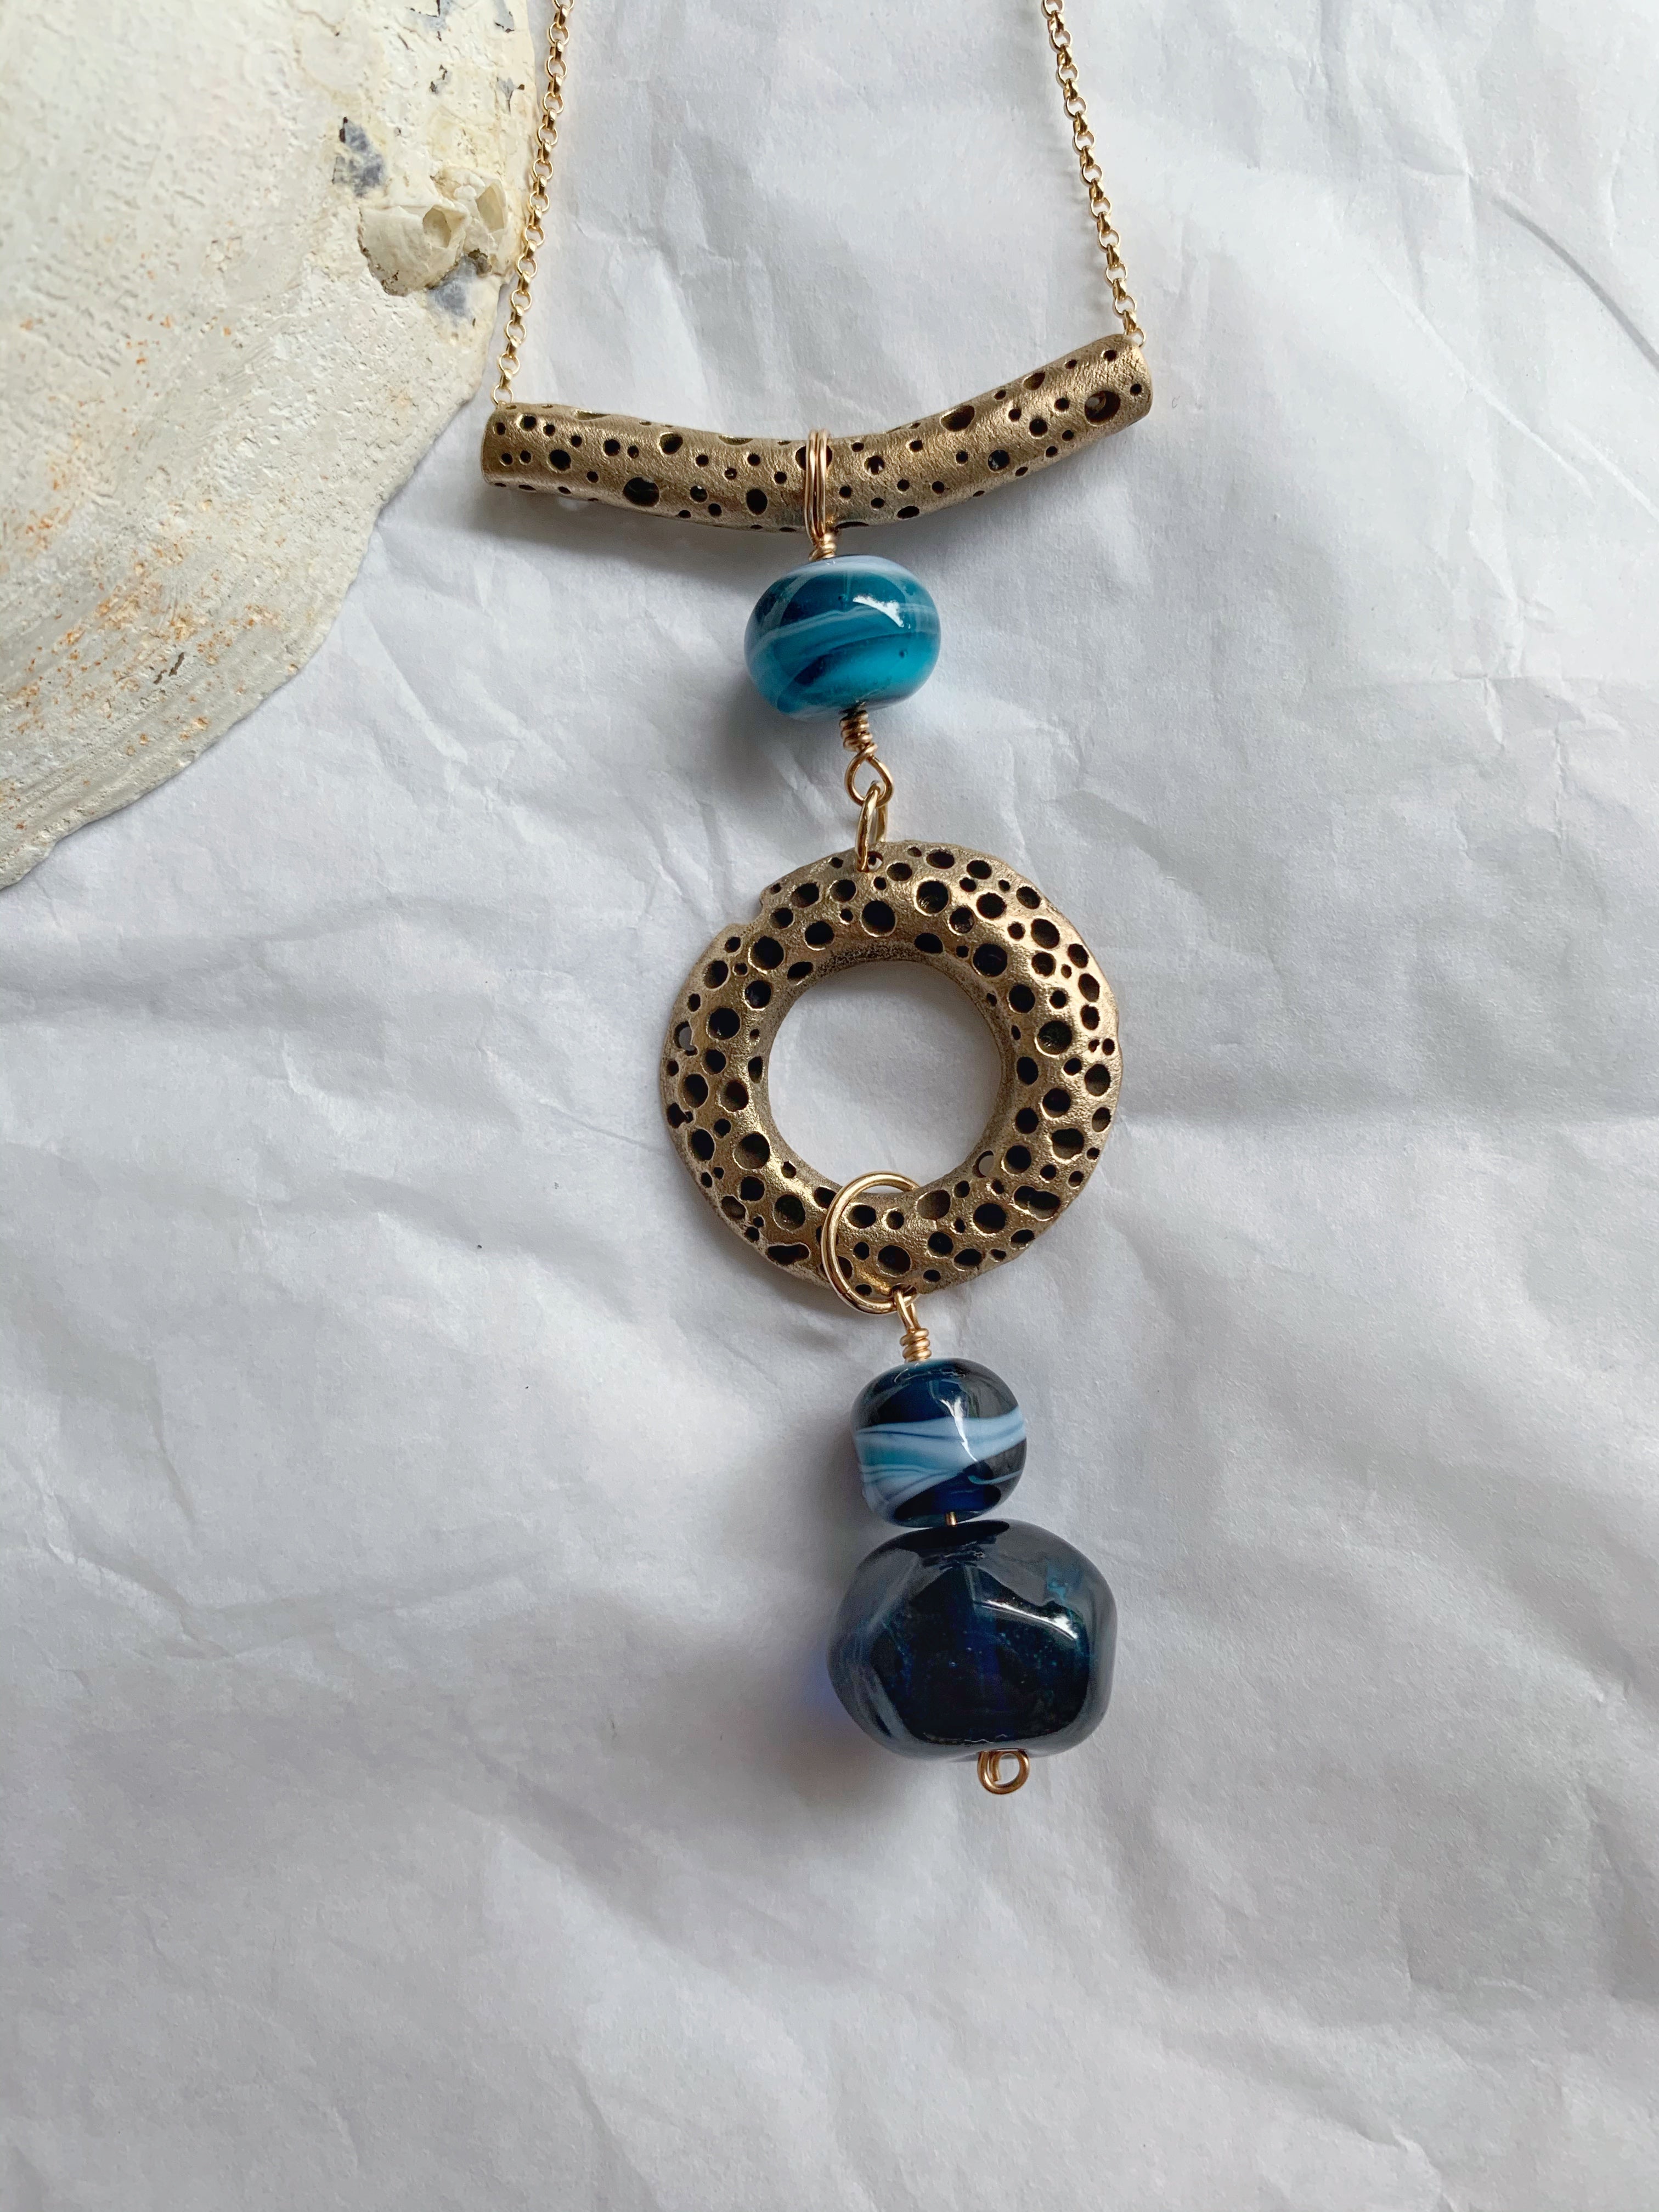 Artisan made bronze and blue glass bead statement necklace